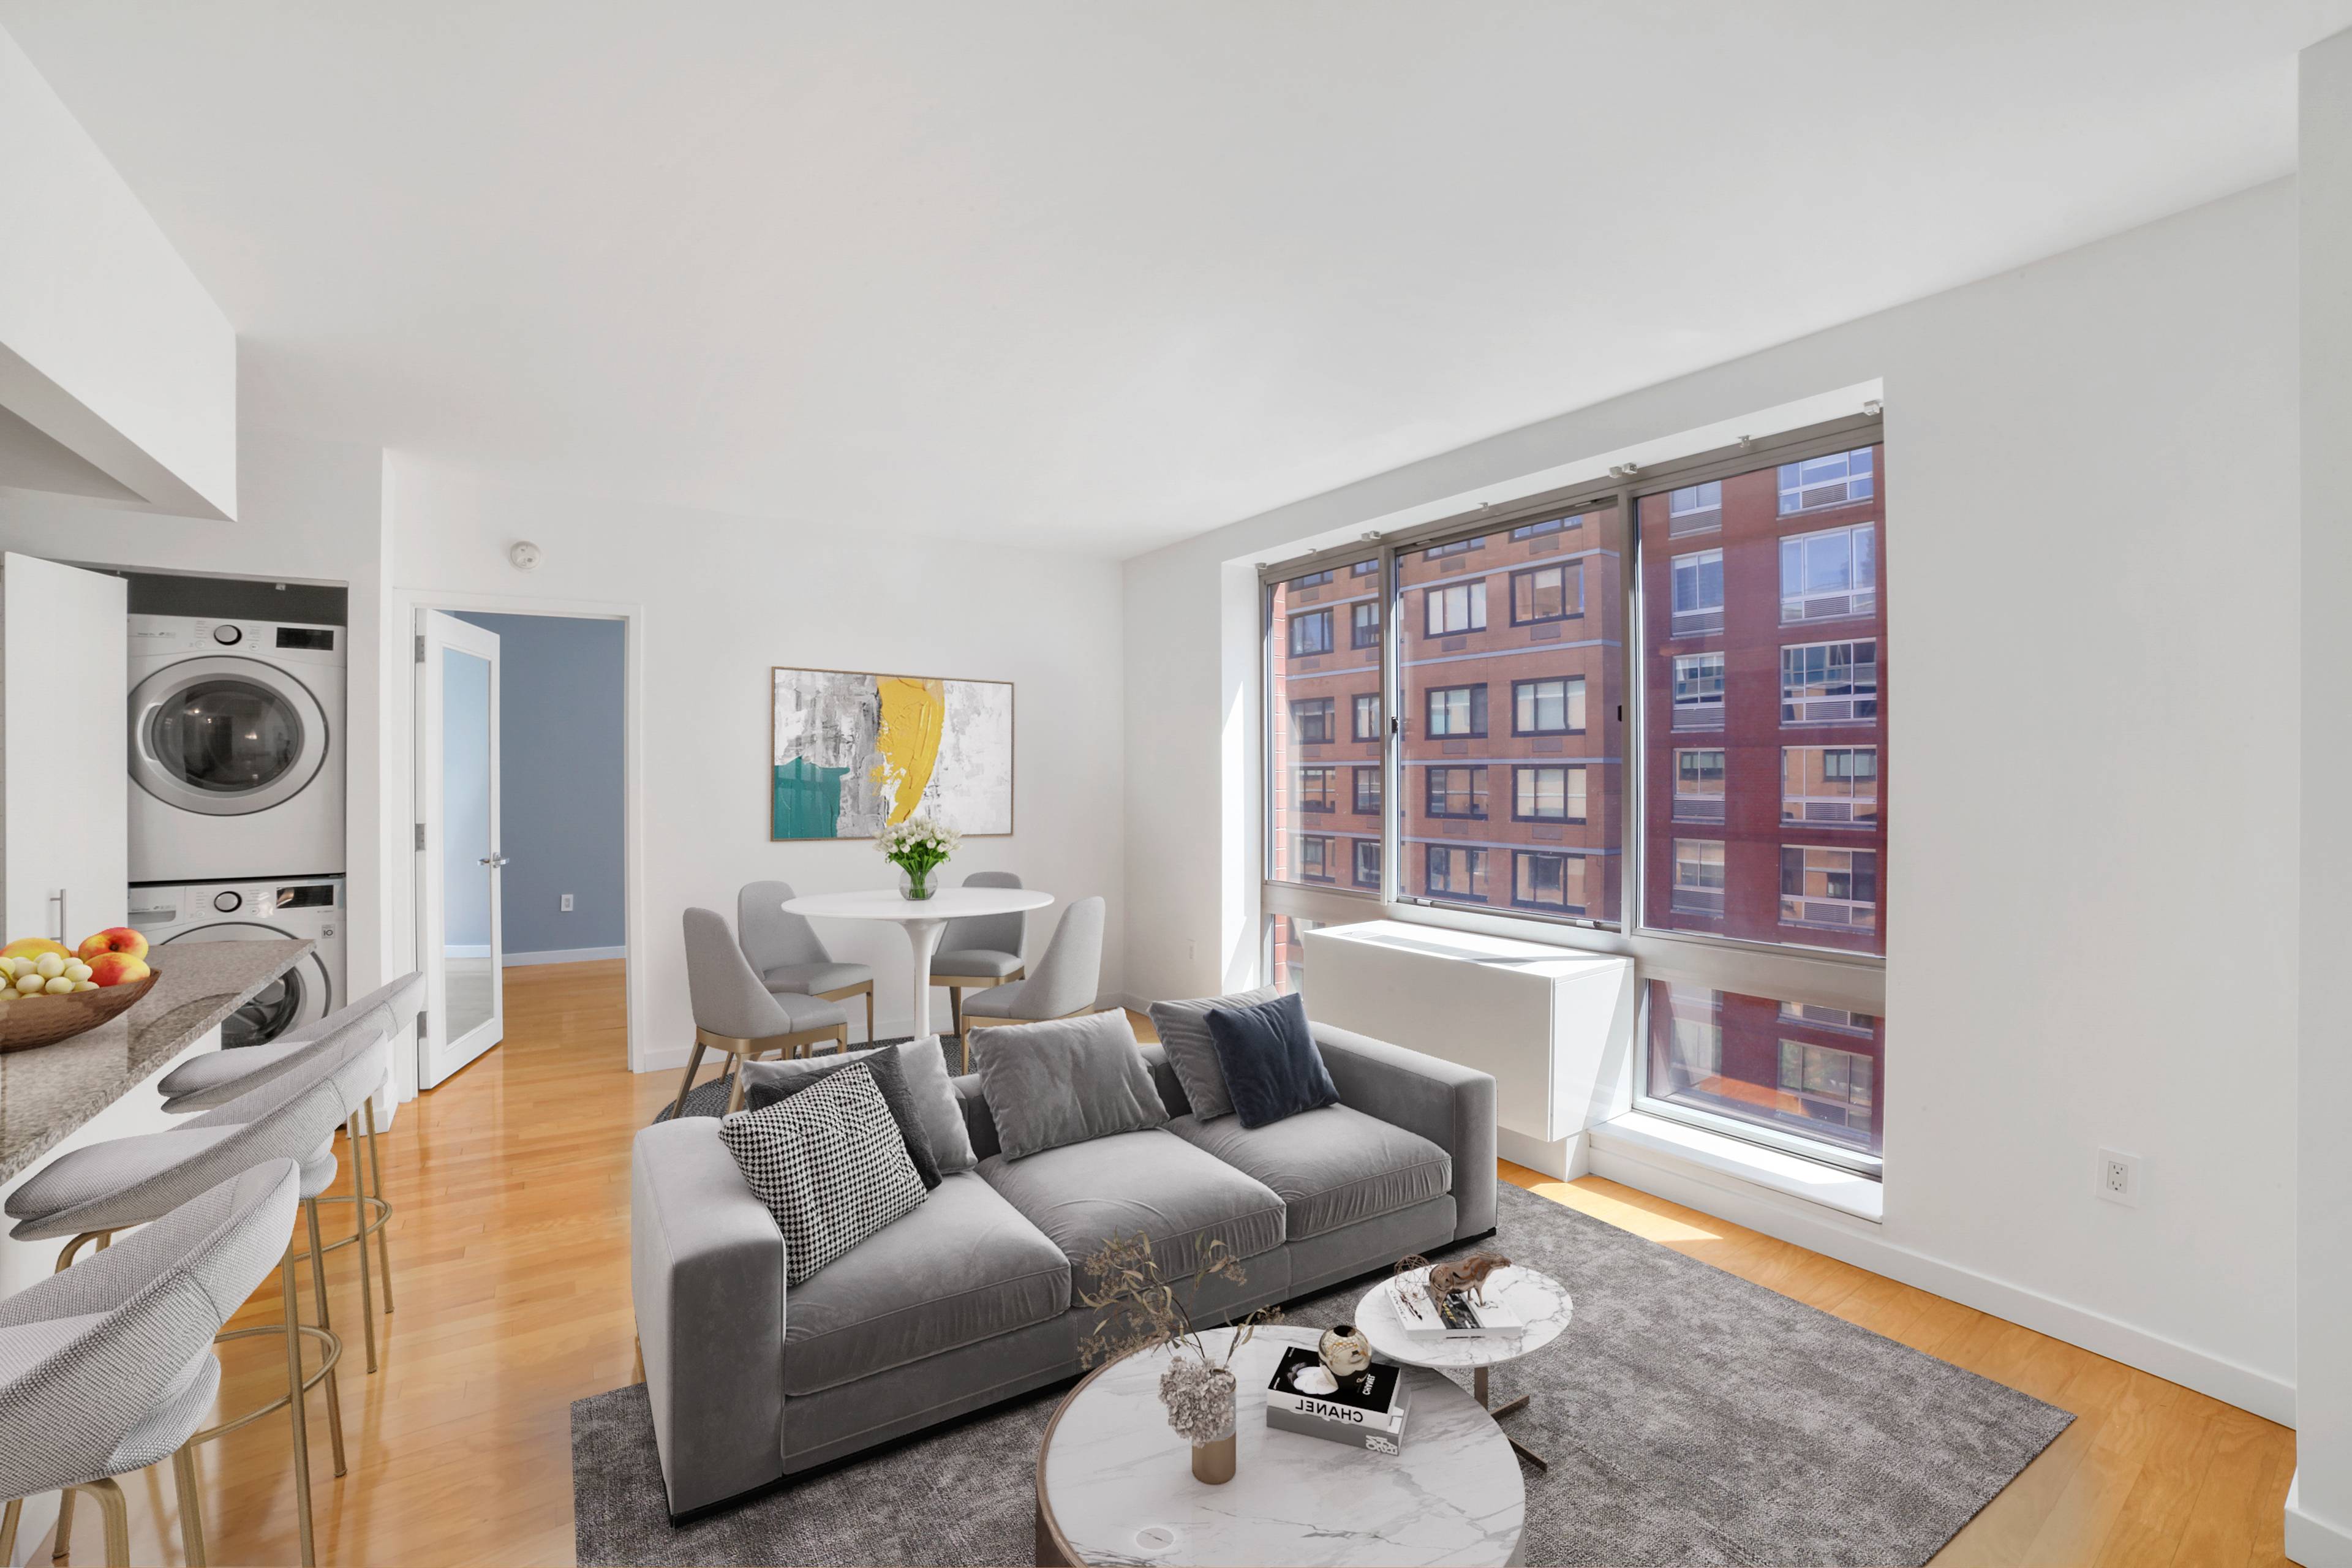 2Beds and 2Baths Chelsea Gem with Amazing natural light